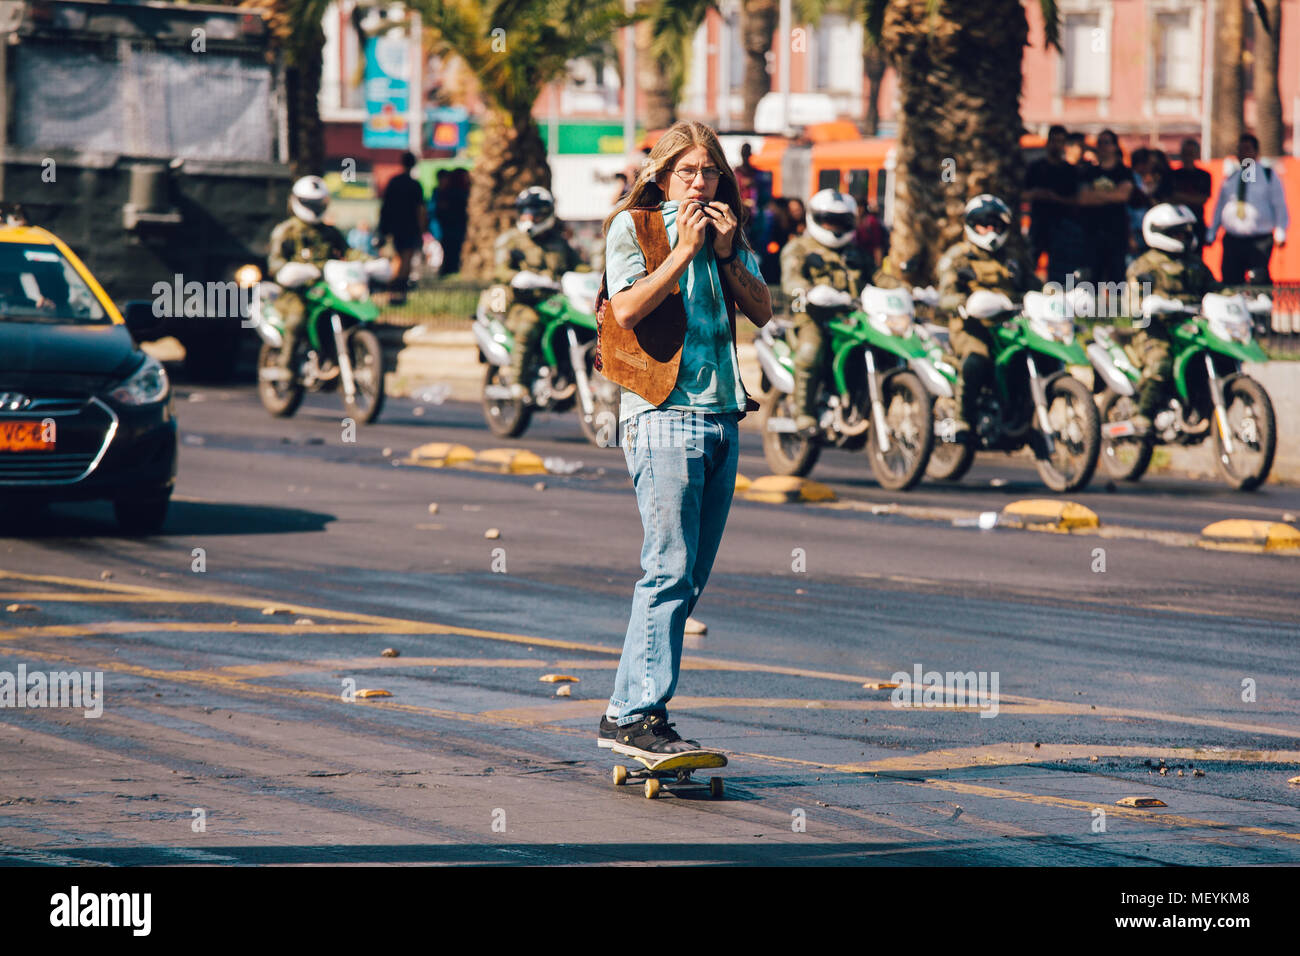 Santiago, Chile - April 19, 2018: skater is affected by tear gas during a demonstration demanding an end to the Profit in the Education. Stock Photo